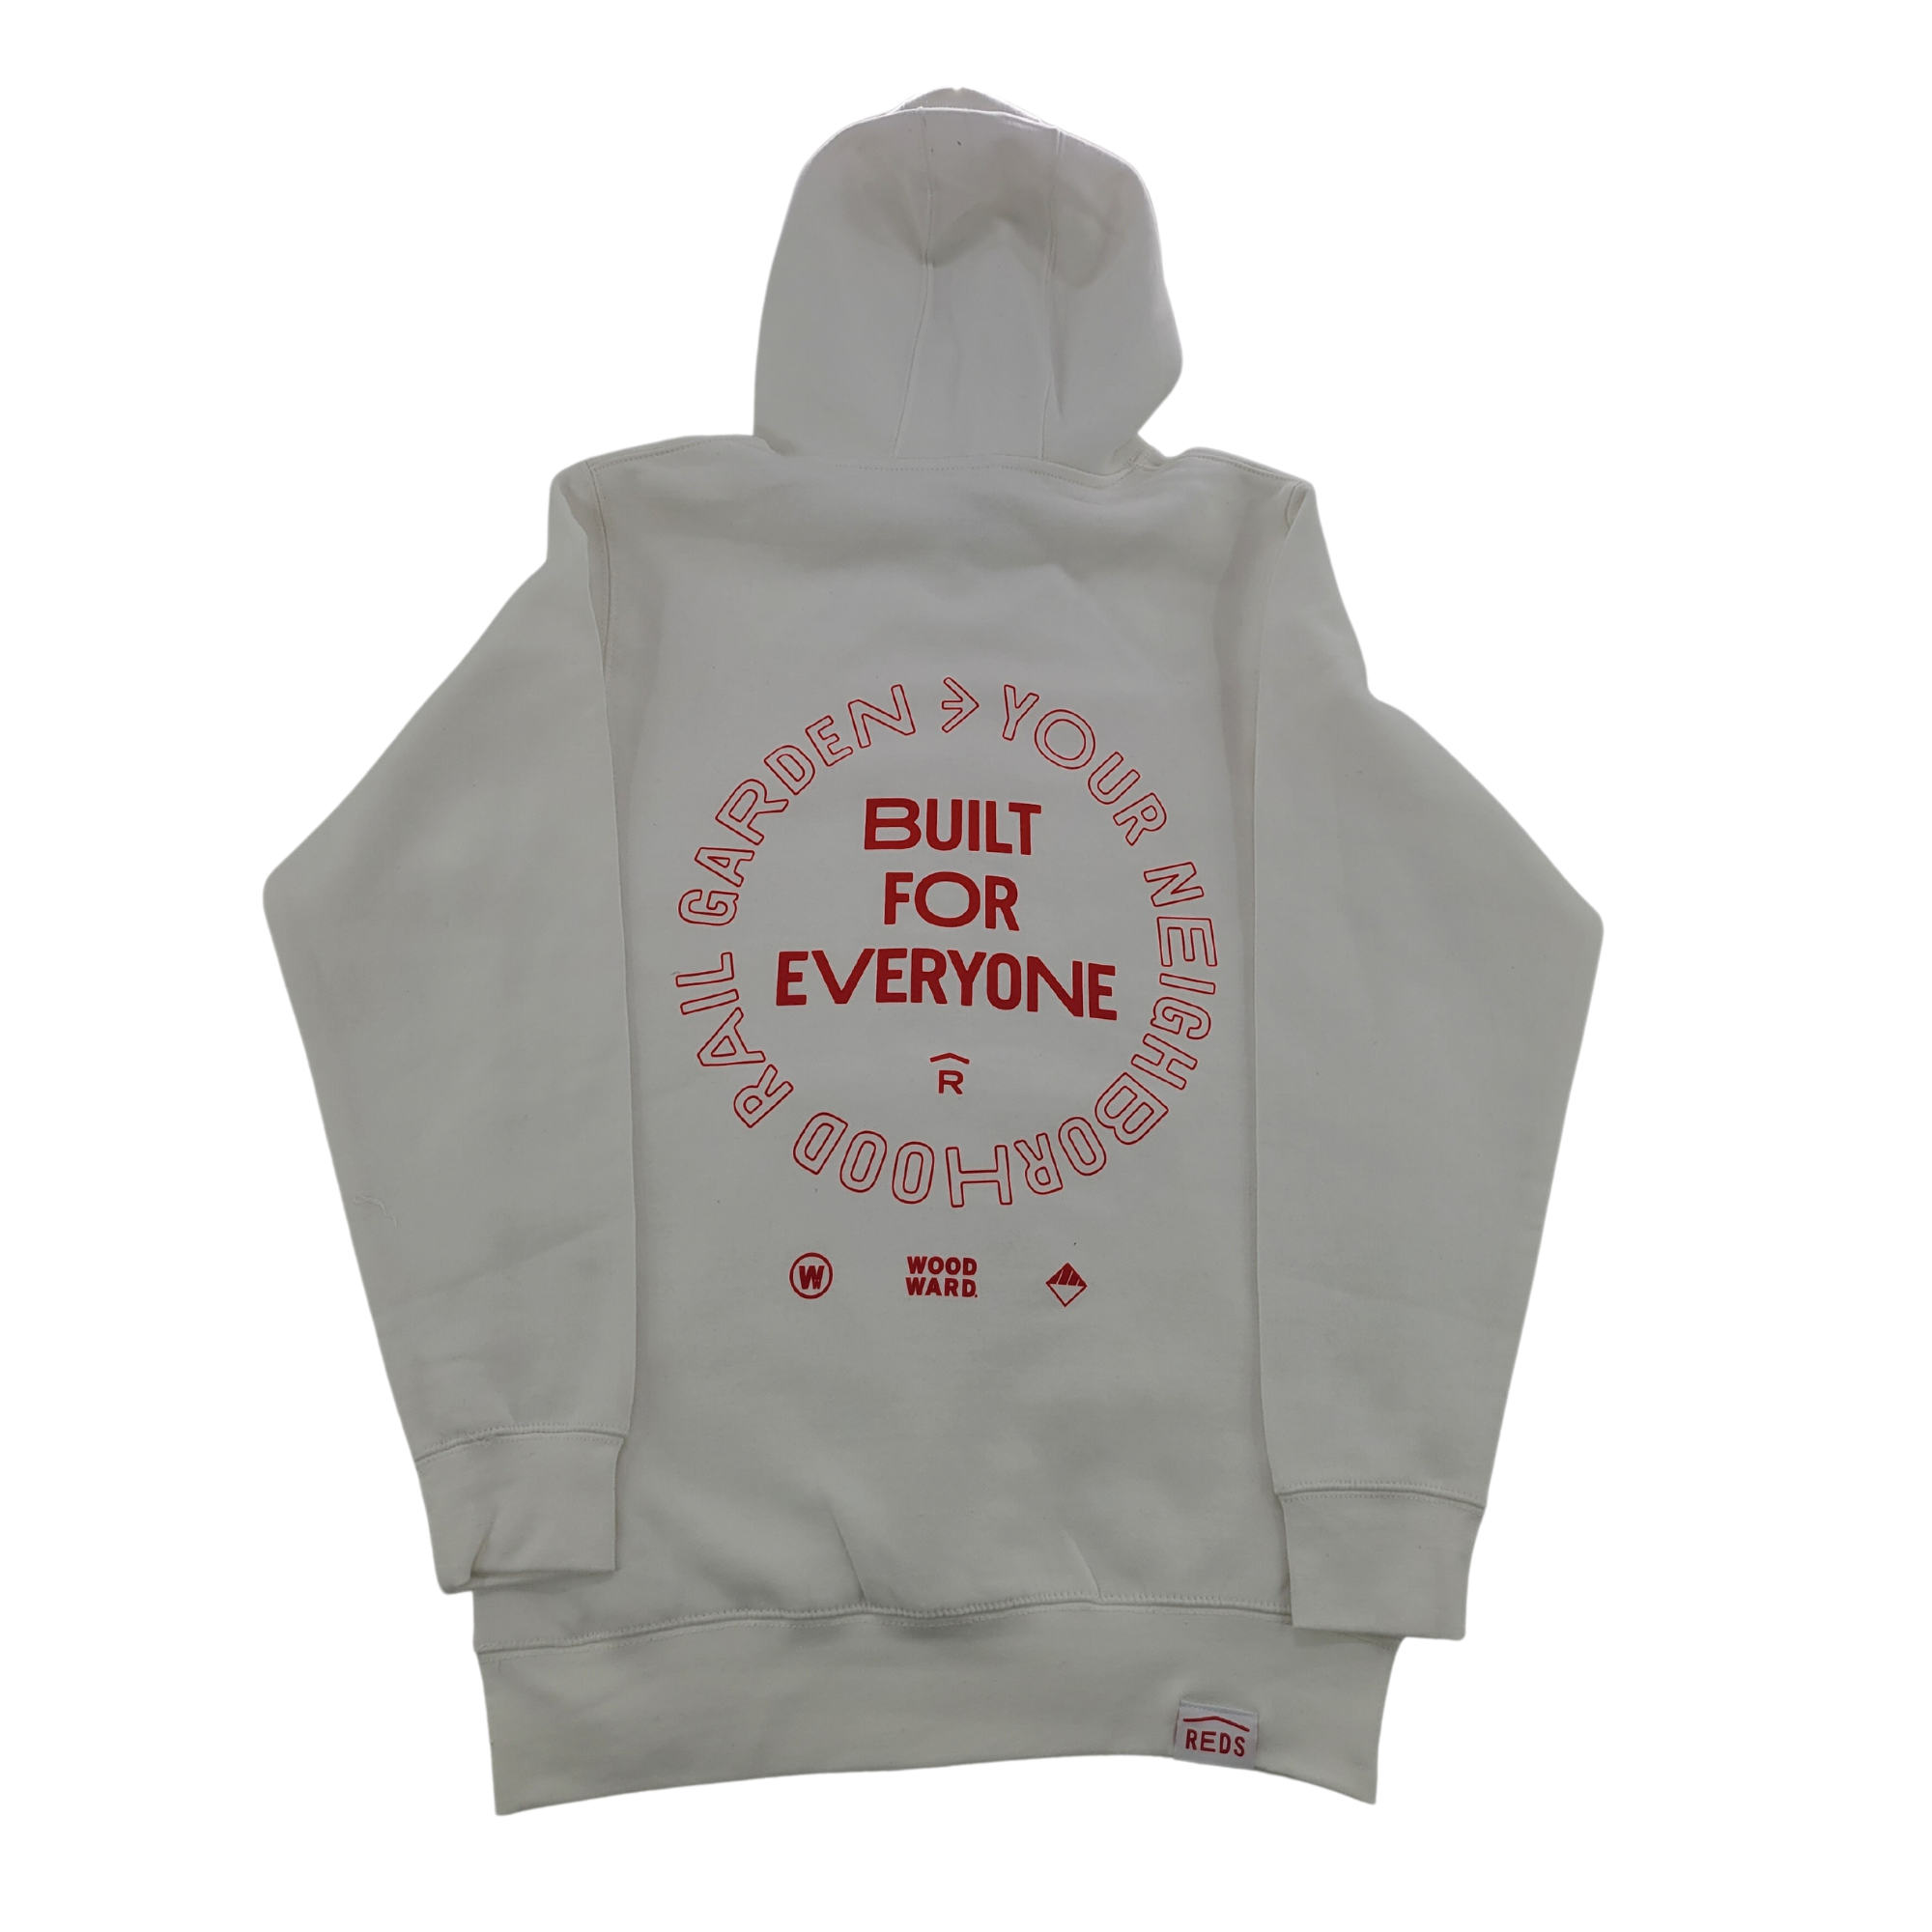 REDS Built For Everyone Hoodie